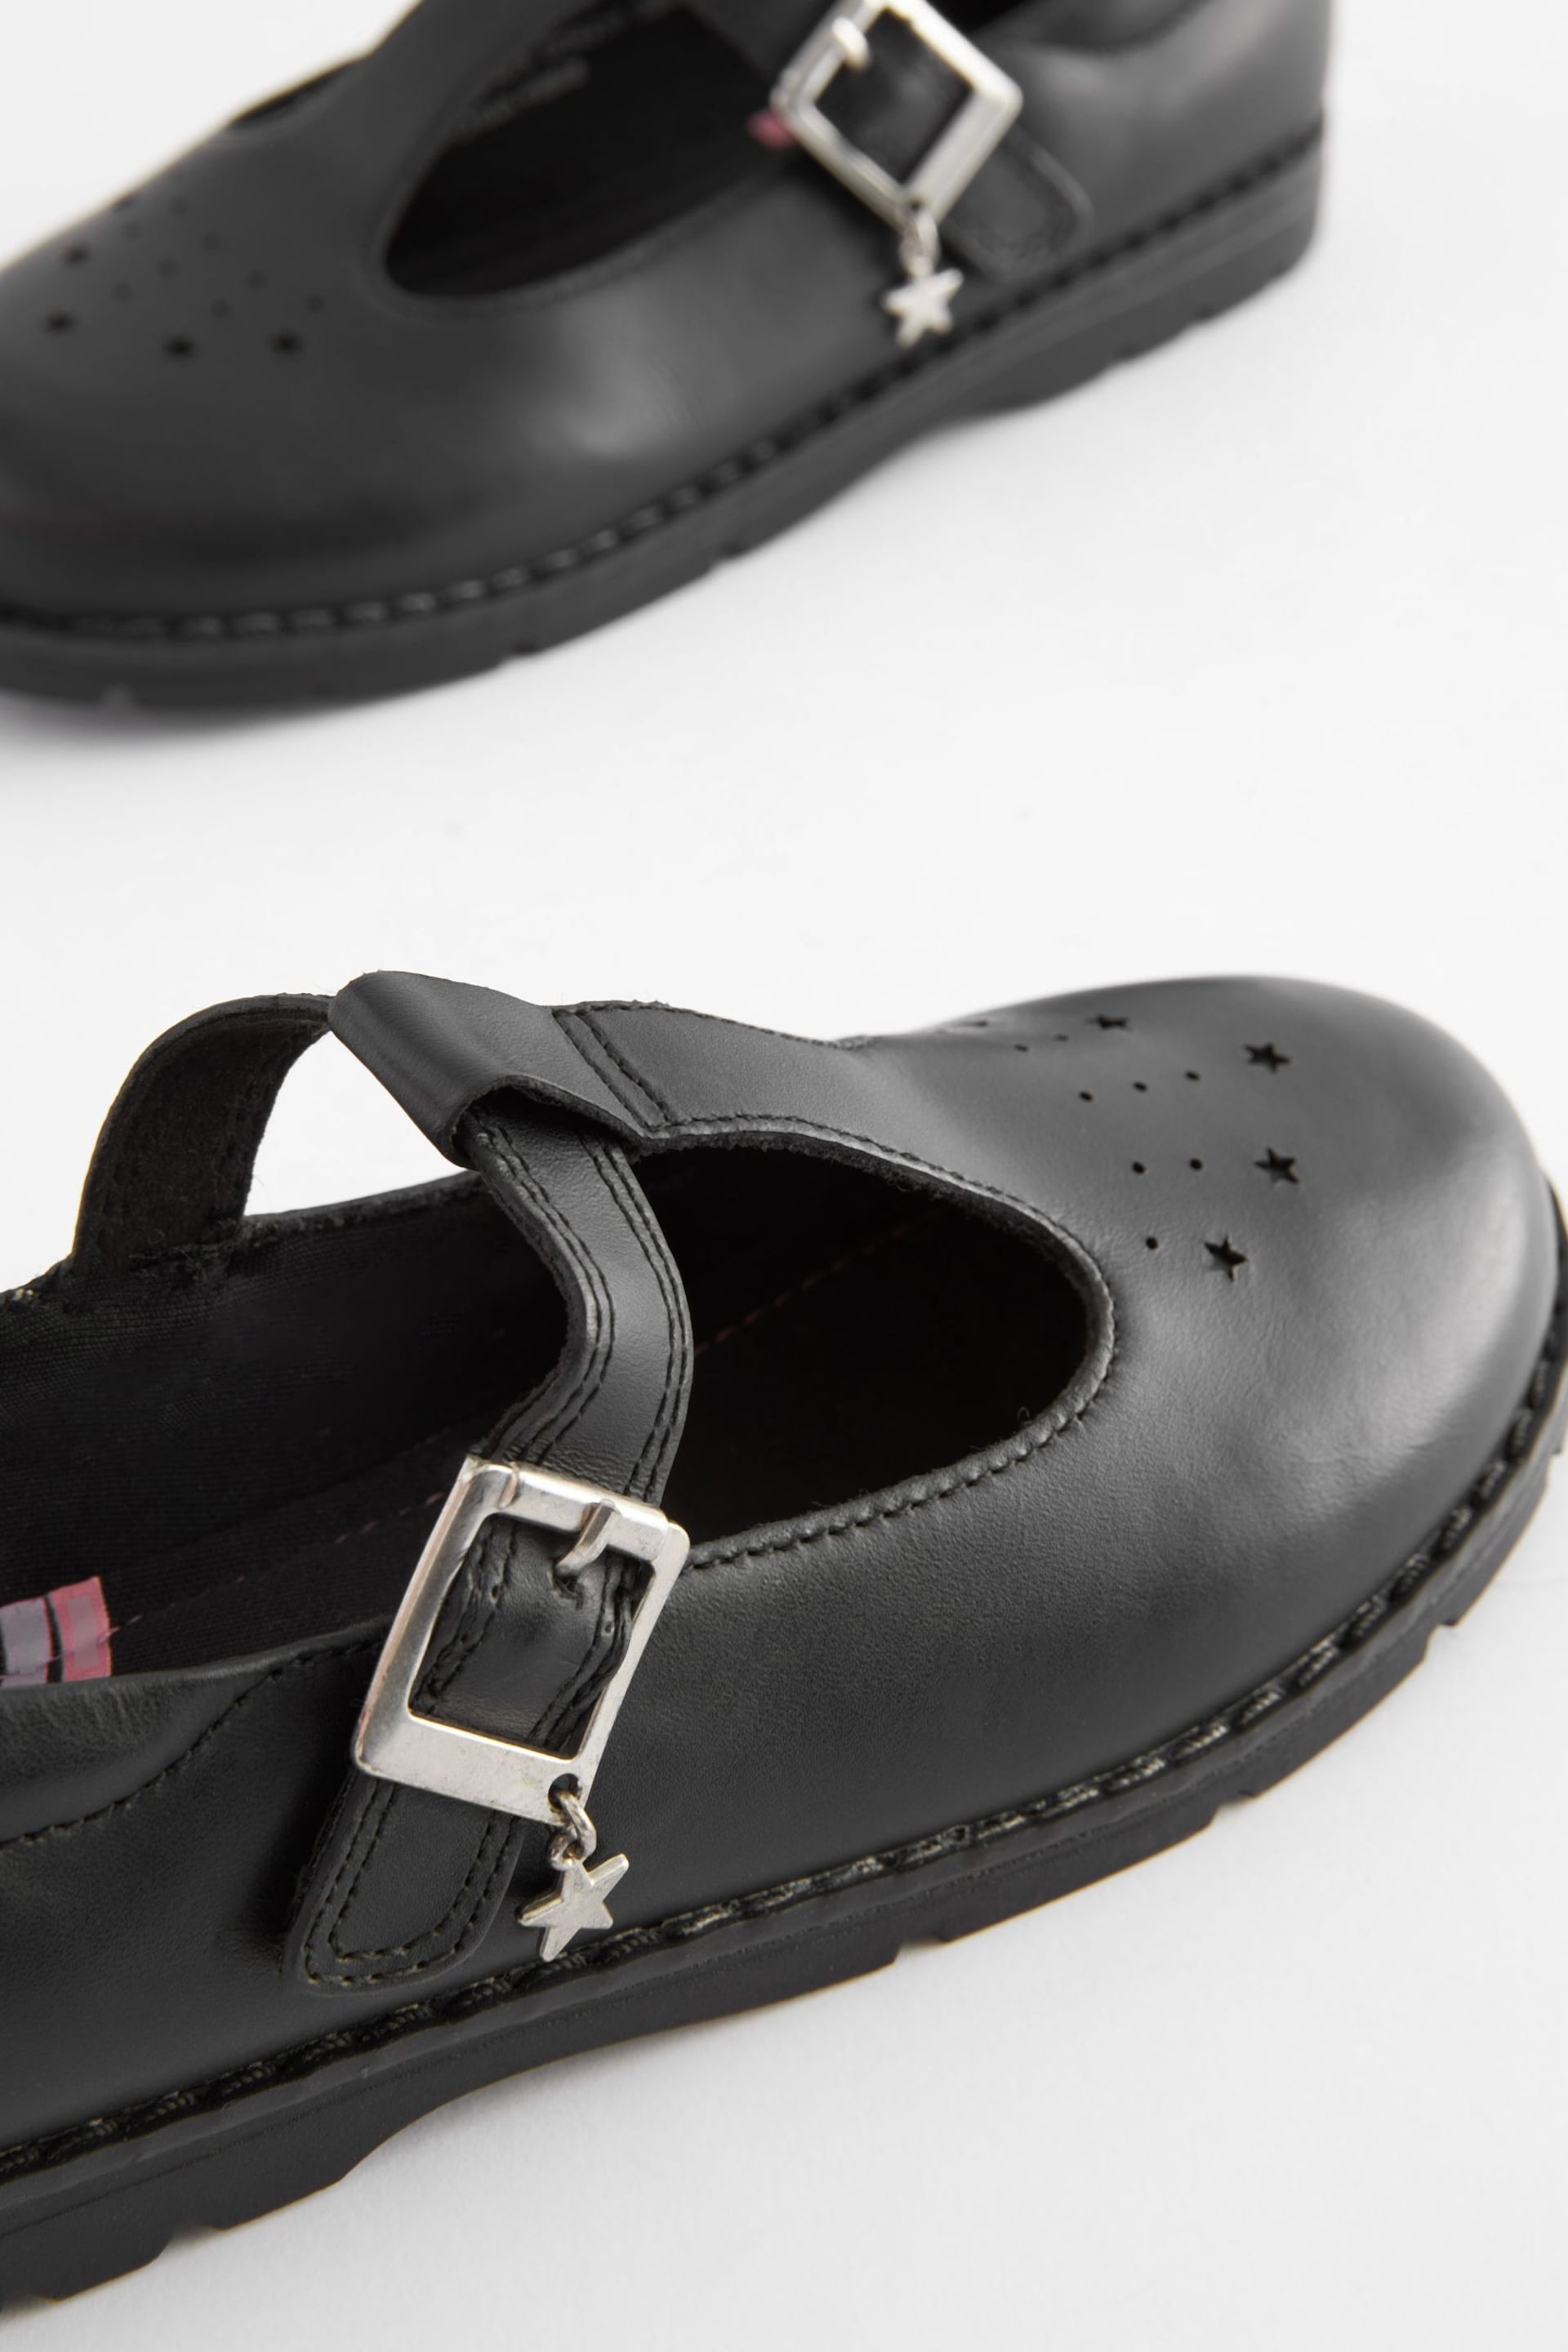 Black Standard Fit (F) Leather Junior T-Bar School Shoes - Image 5 of 5